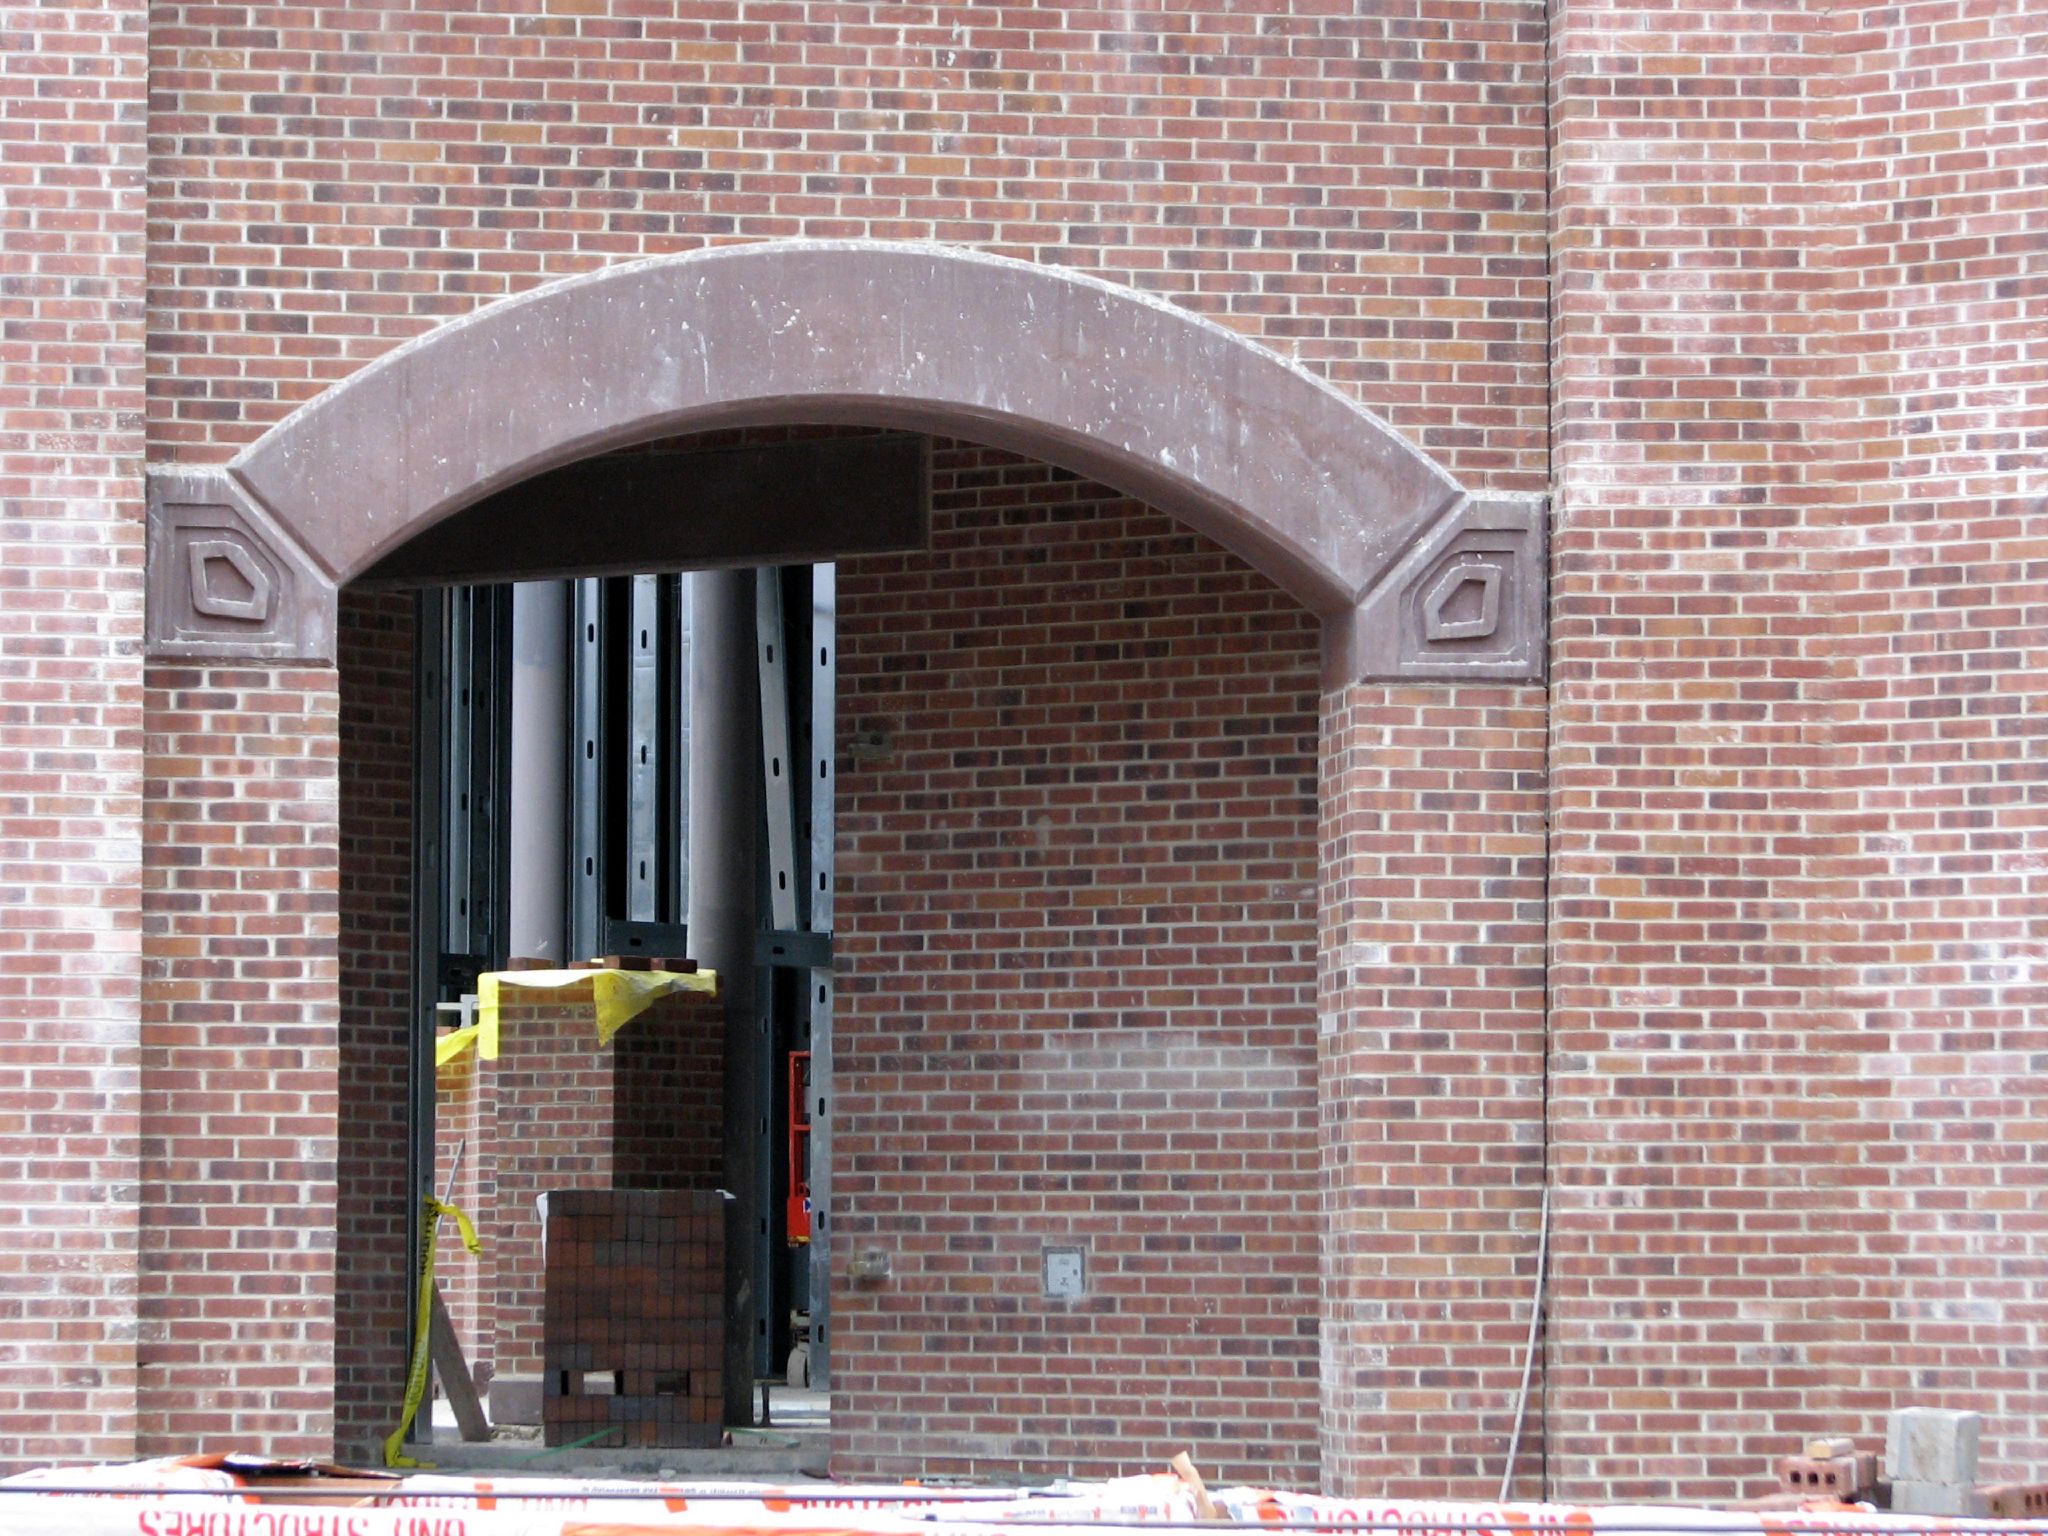 a large archway to a brick building under construction